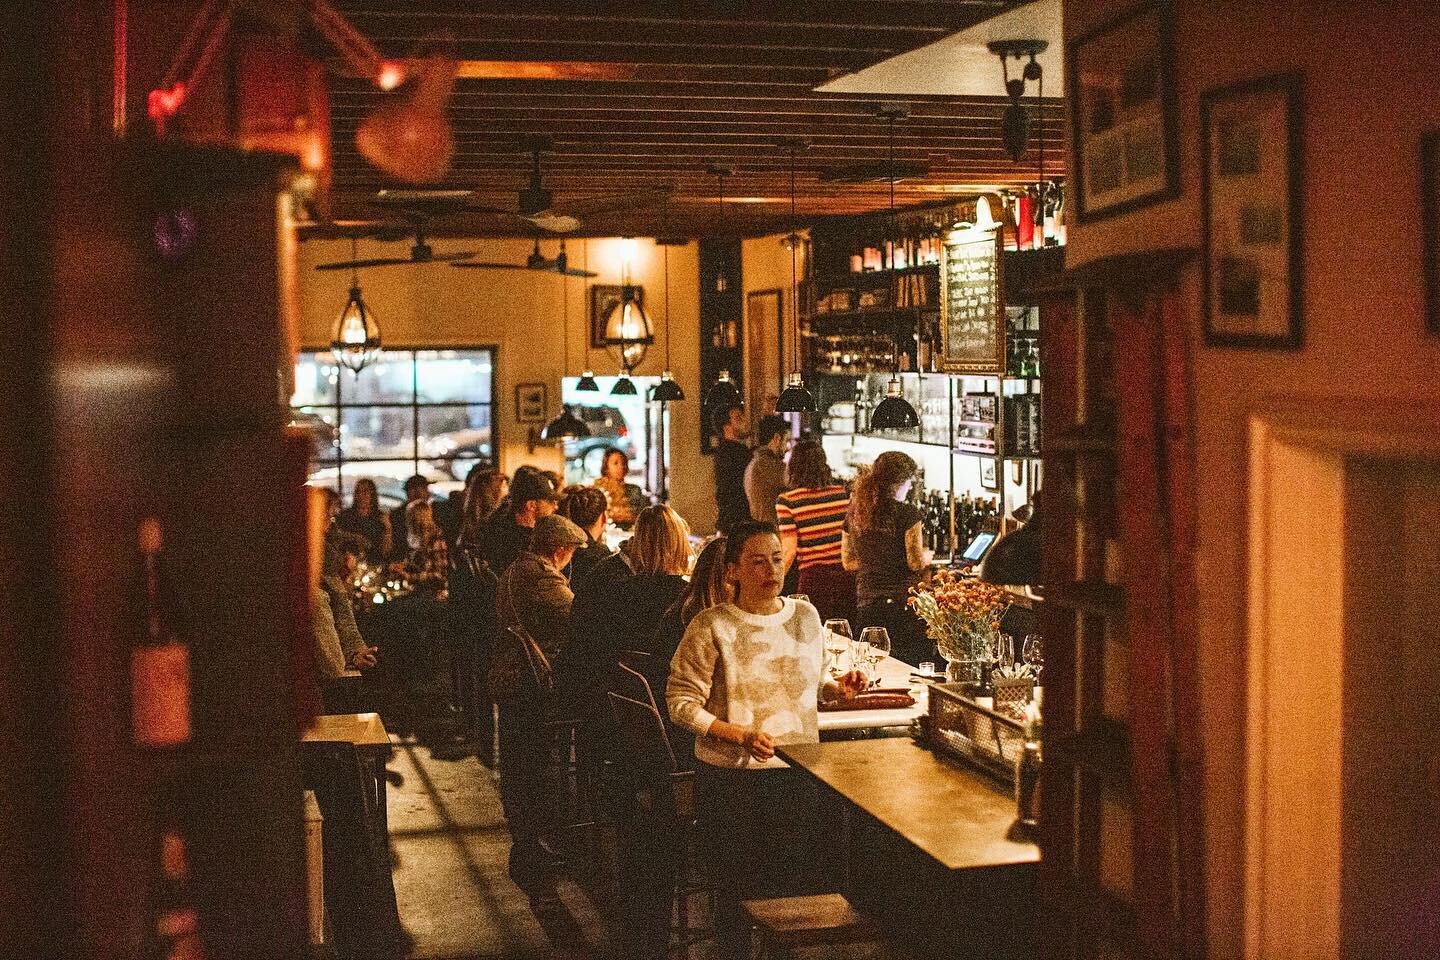 doors open today with Happy Hour 5pm-7pm!
$5 can-o-beer
$10 glass-o-wine
$40 bottle-o-wine
.
Reserve your table @resy : link in bio
.
#happyhour #losangeles #winebar #🍷